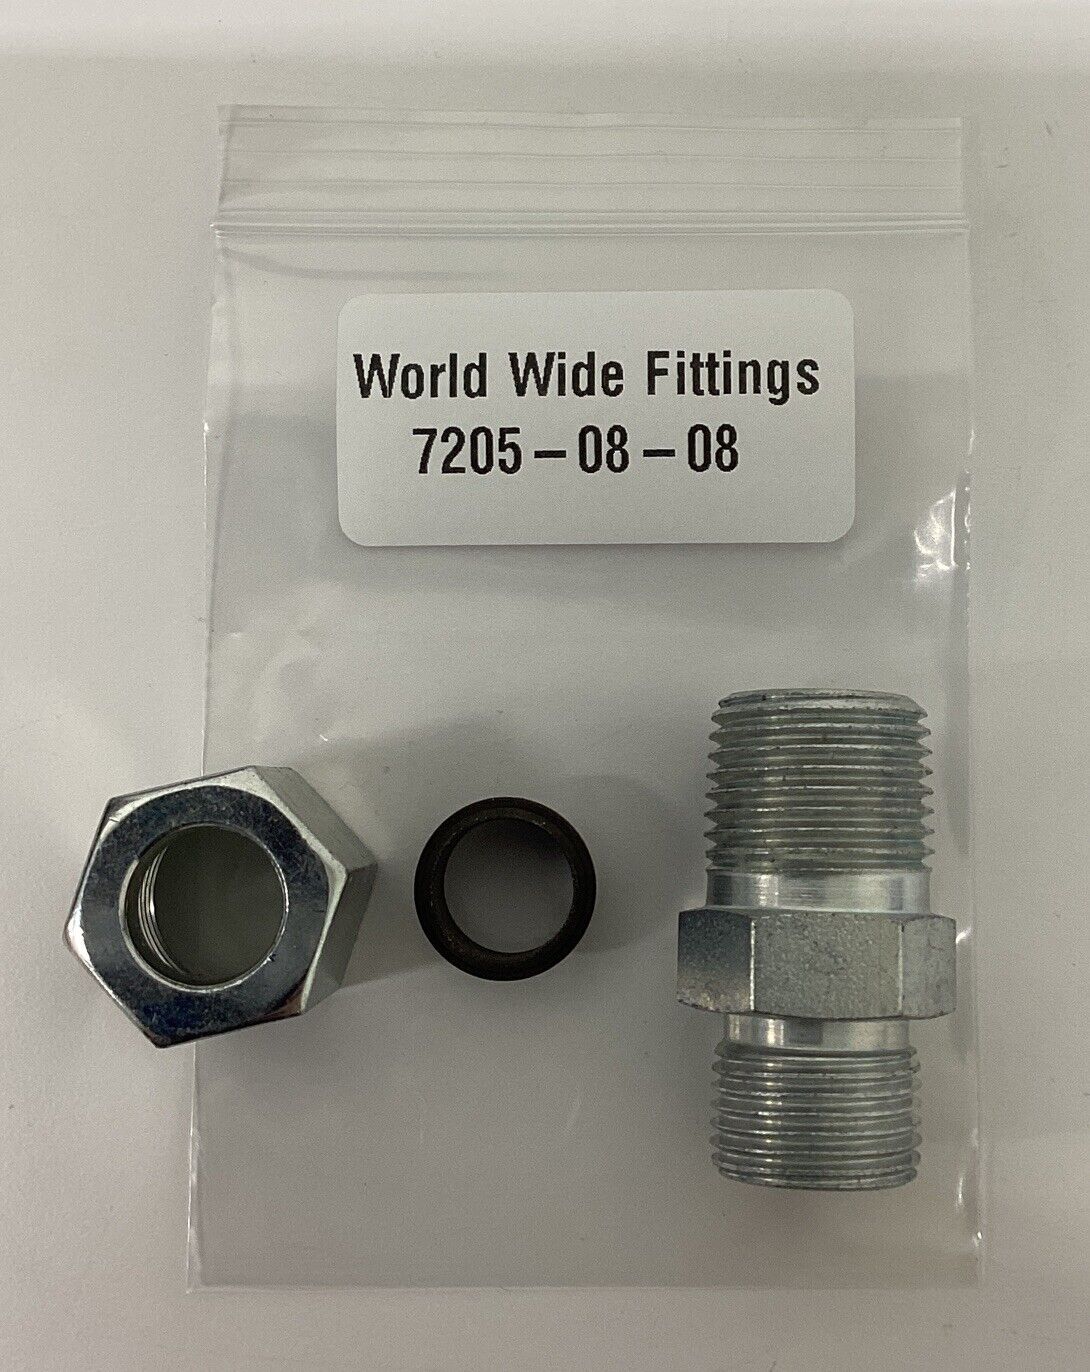 World Wide Fittings 7205-08-08 Flareless Compression to Male Pipe Fitting BL196